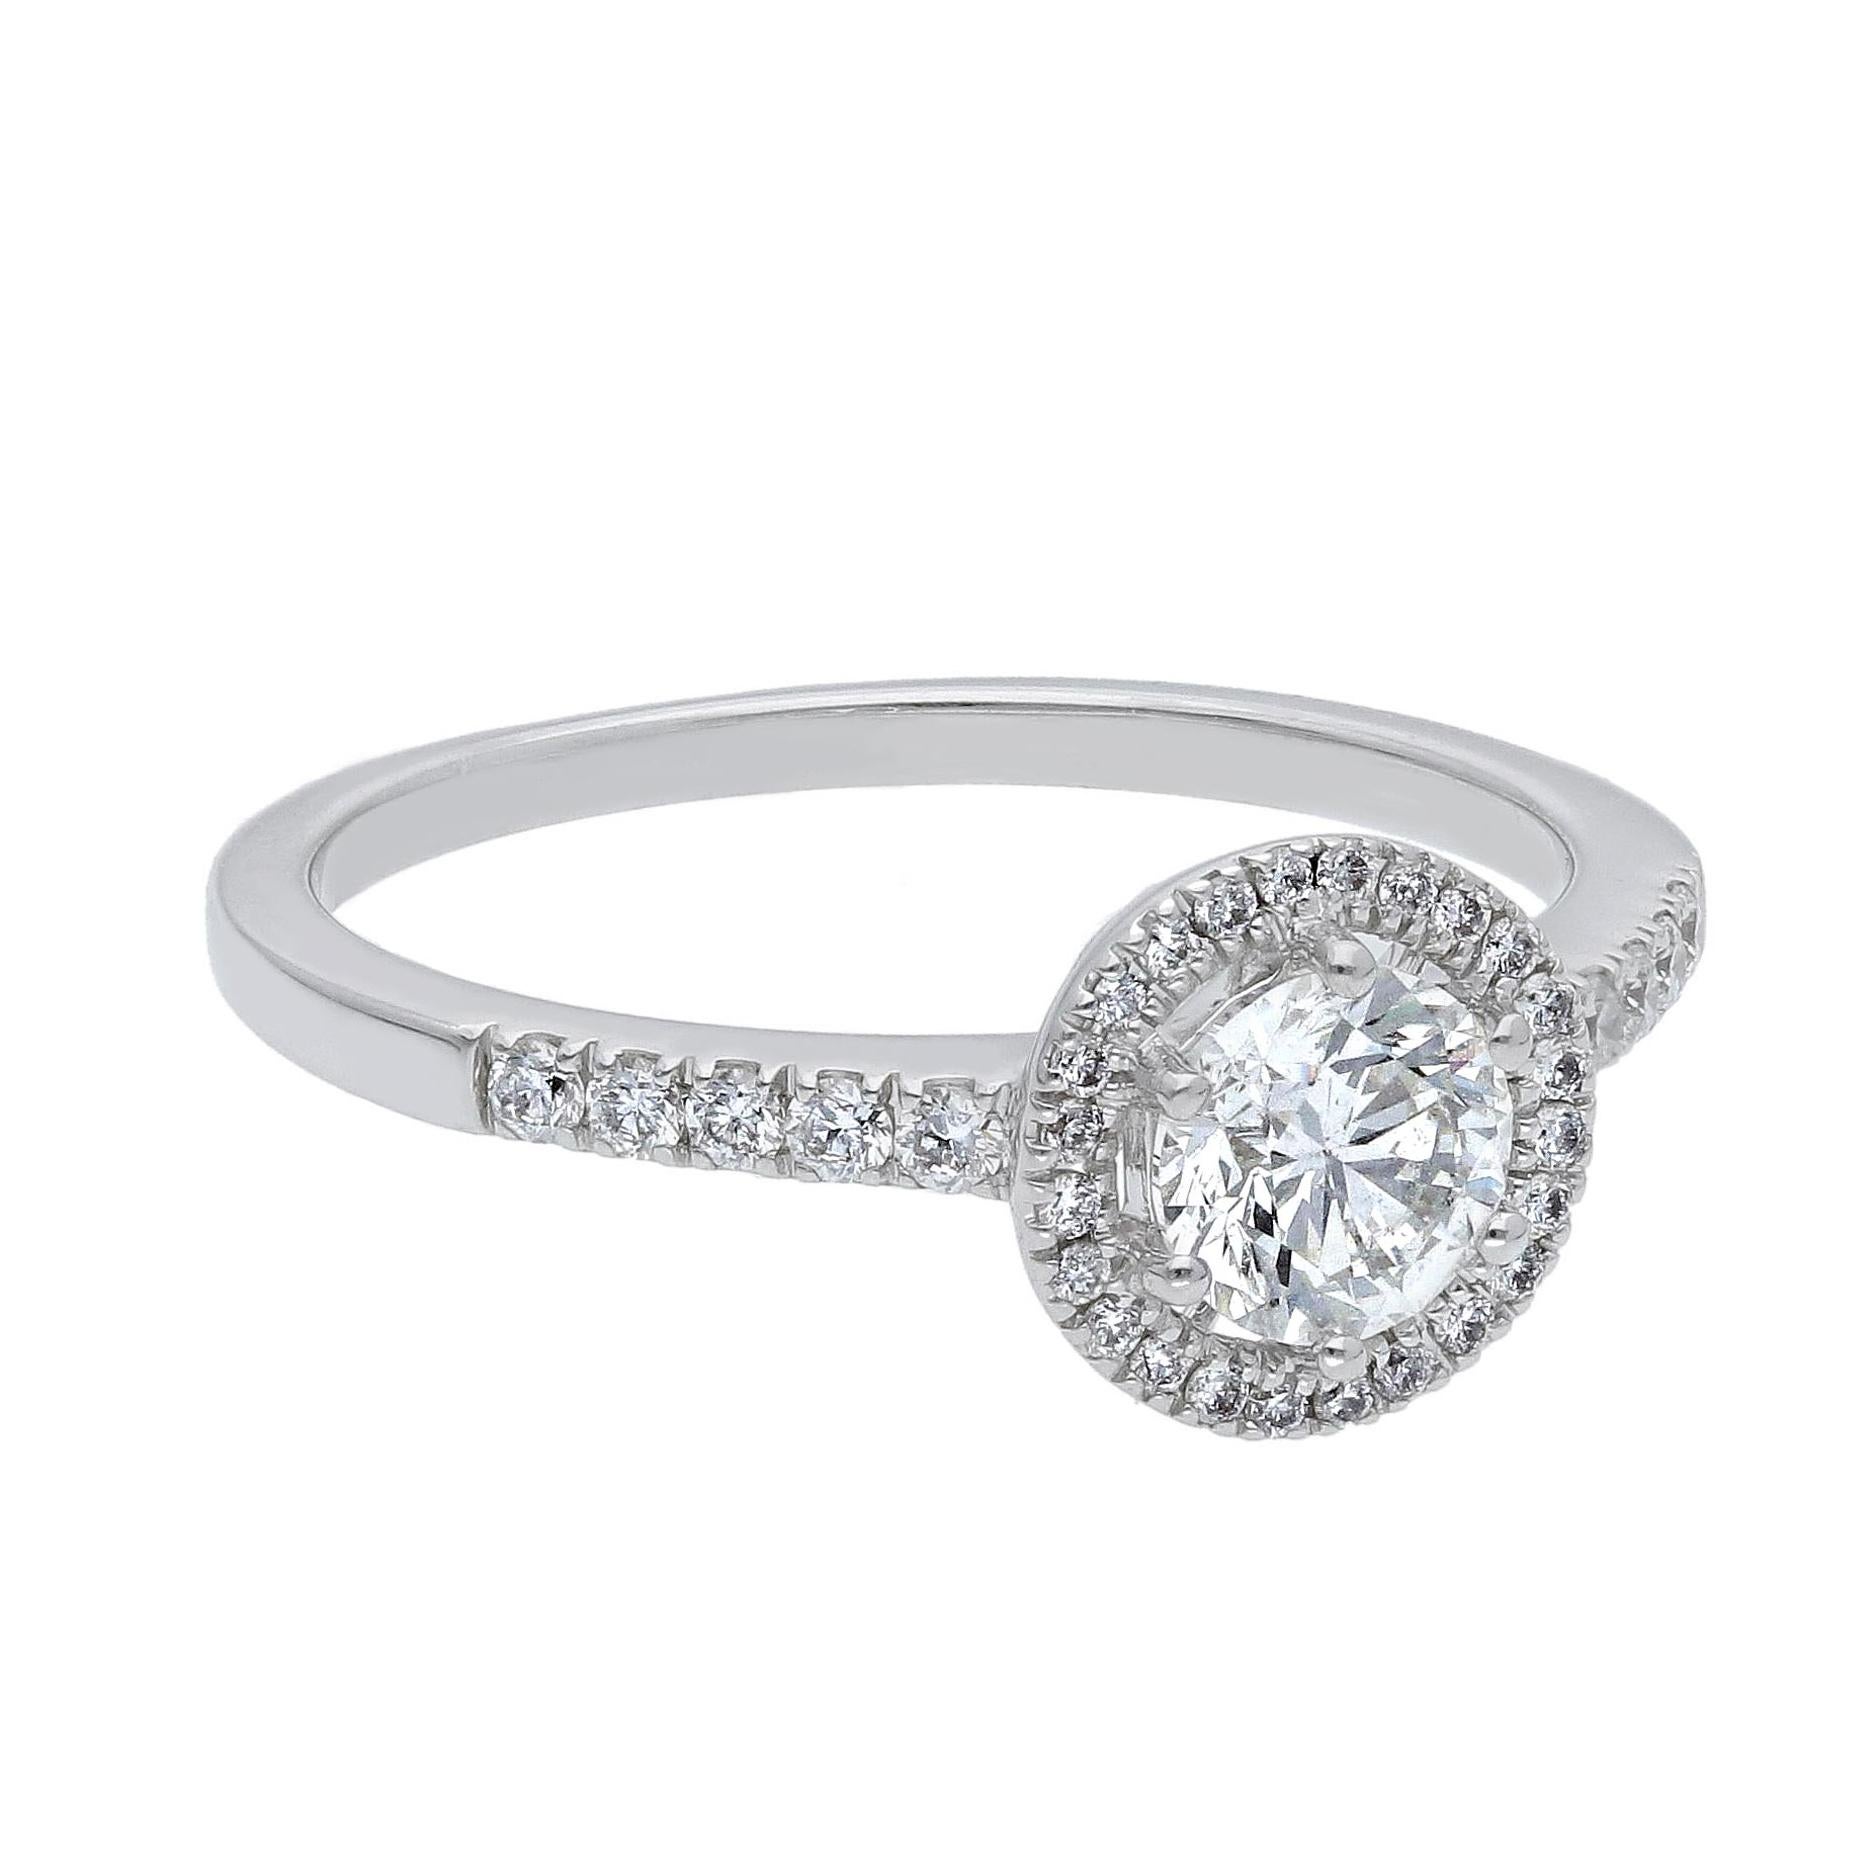 For Sale:  18K White Gold Pradera Halo Engagement Ring with Diamonds 2